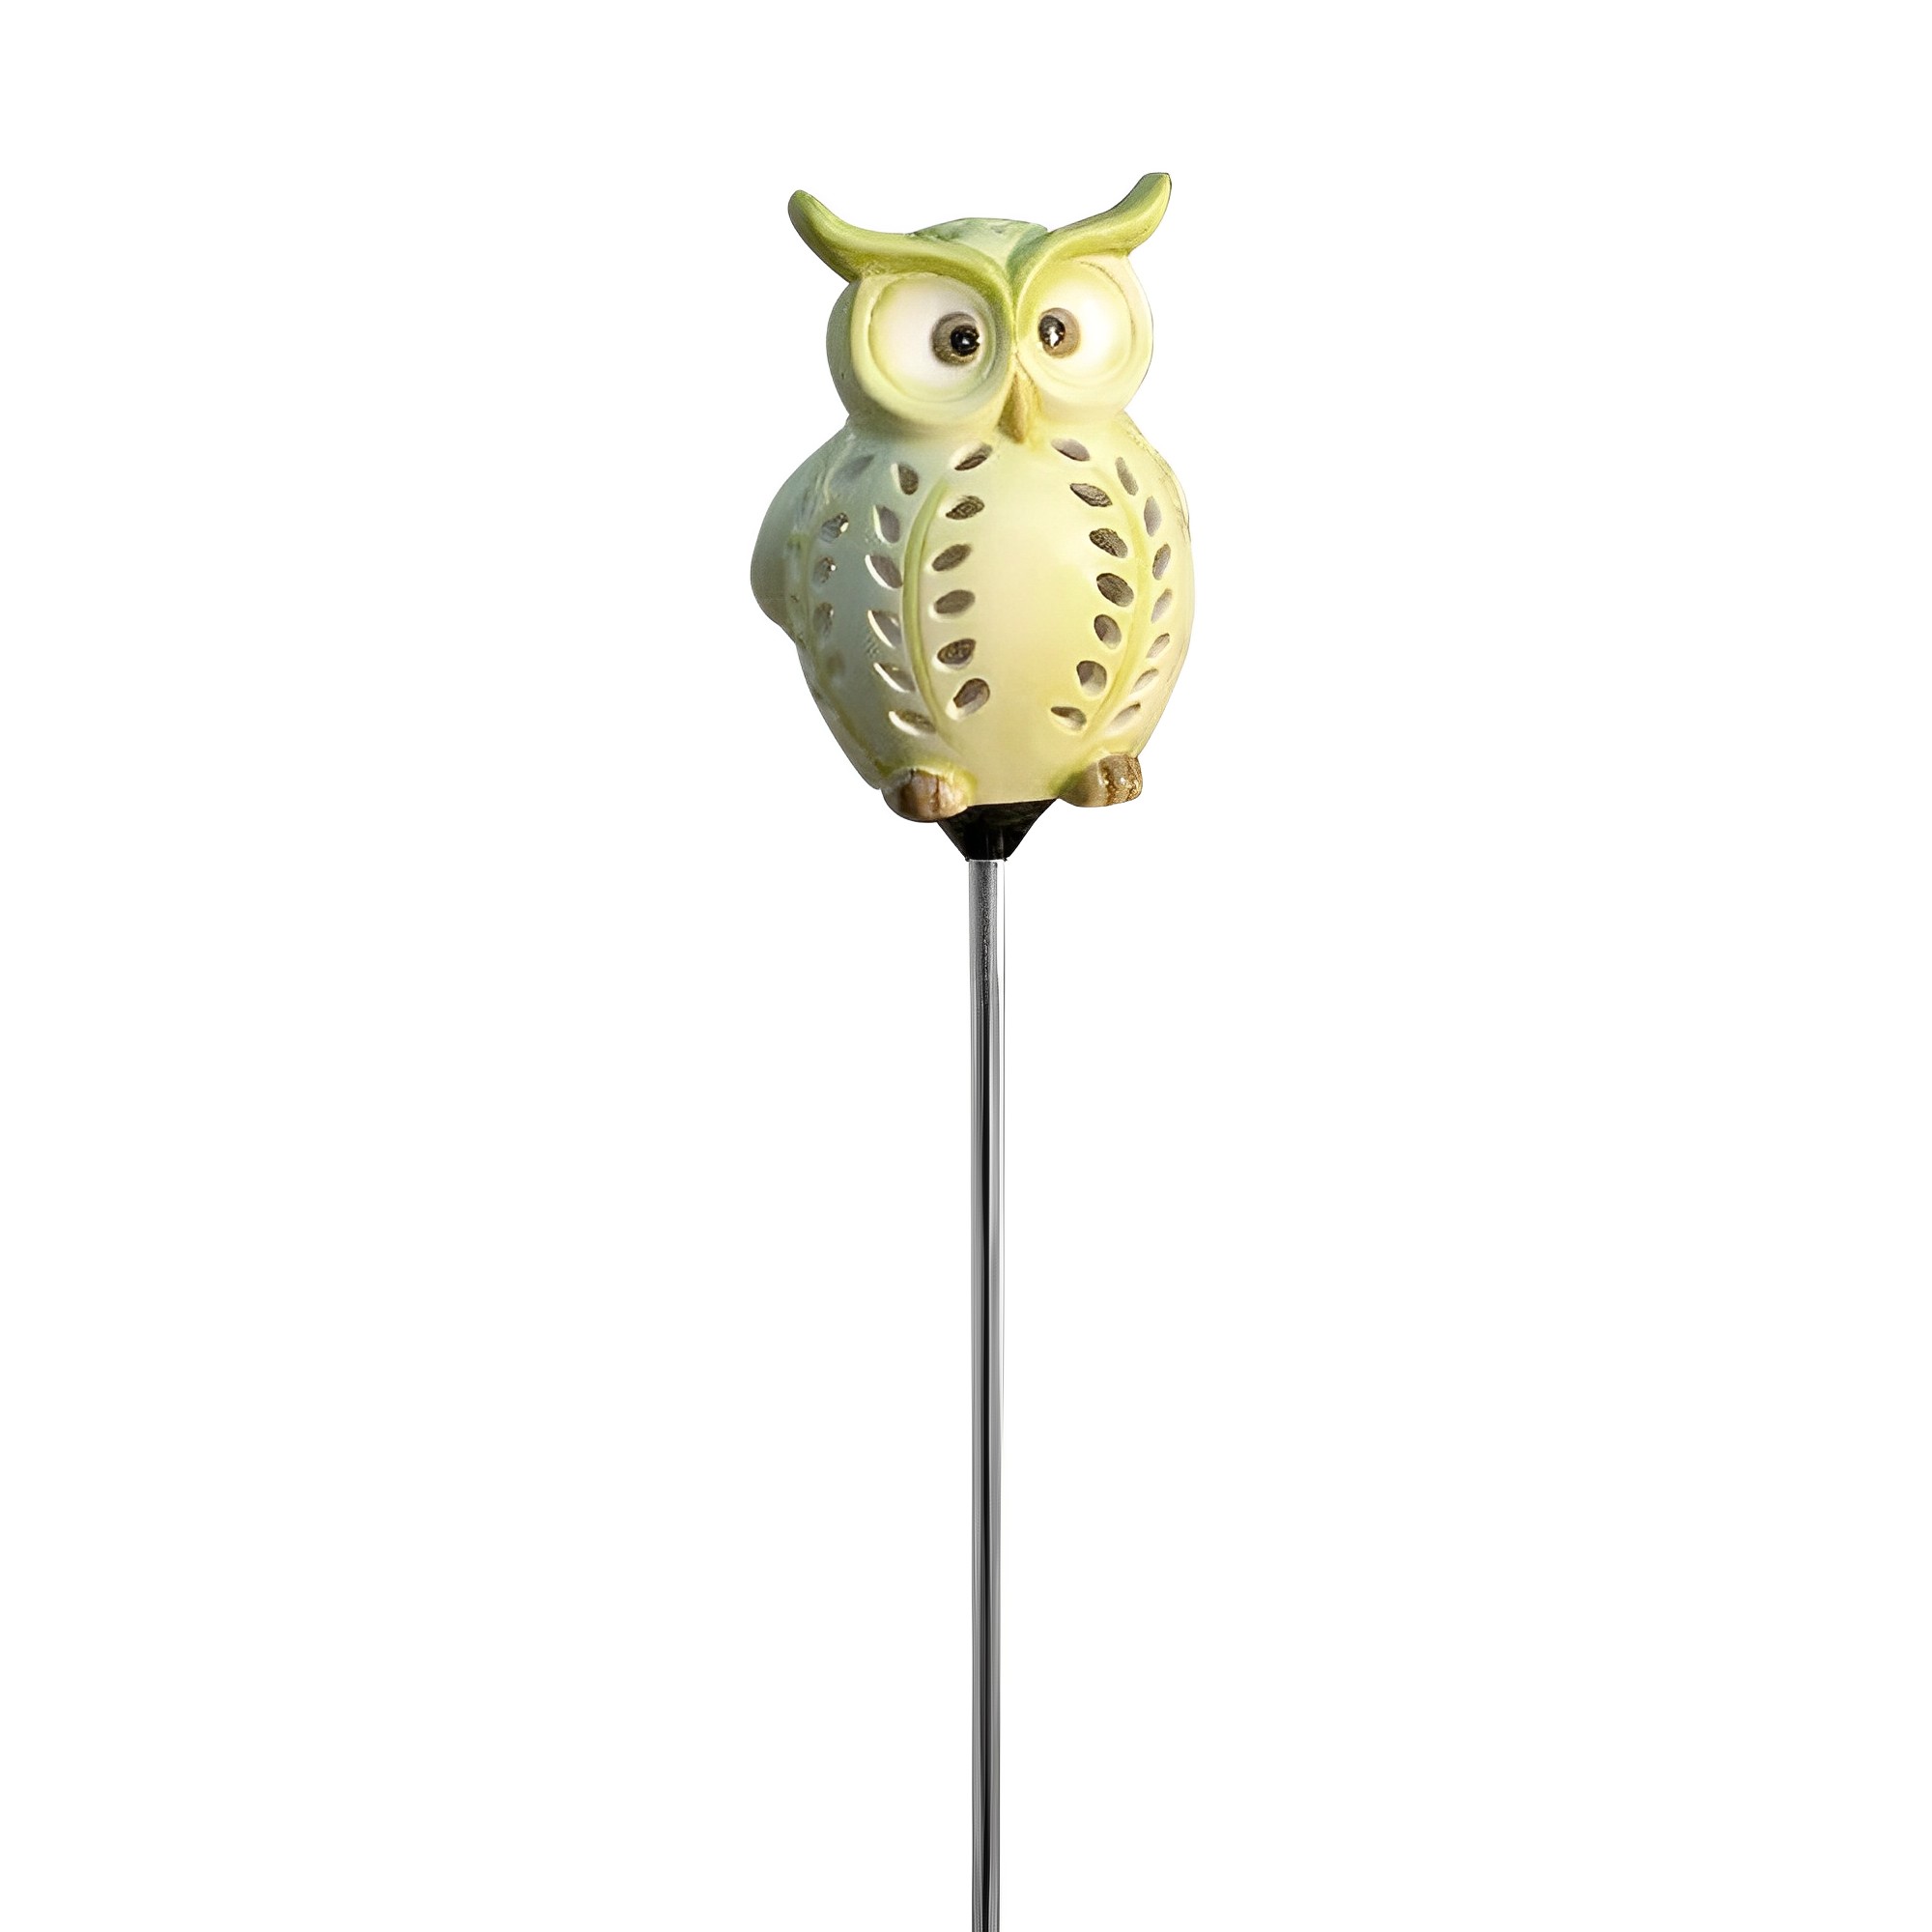 Cute Little Owl Garden Decoration, Best Solar Owl Stake And Solar Owl Light, Ceramic Owl Scarecrow Garden Decor For Your Lawn and Garden - image 3 of 8